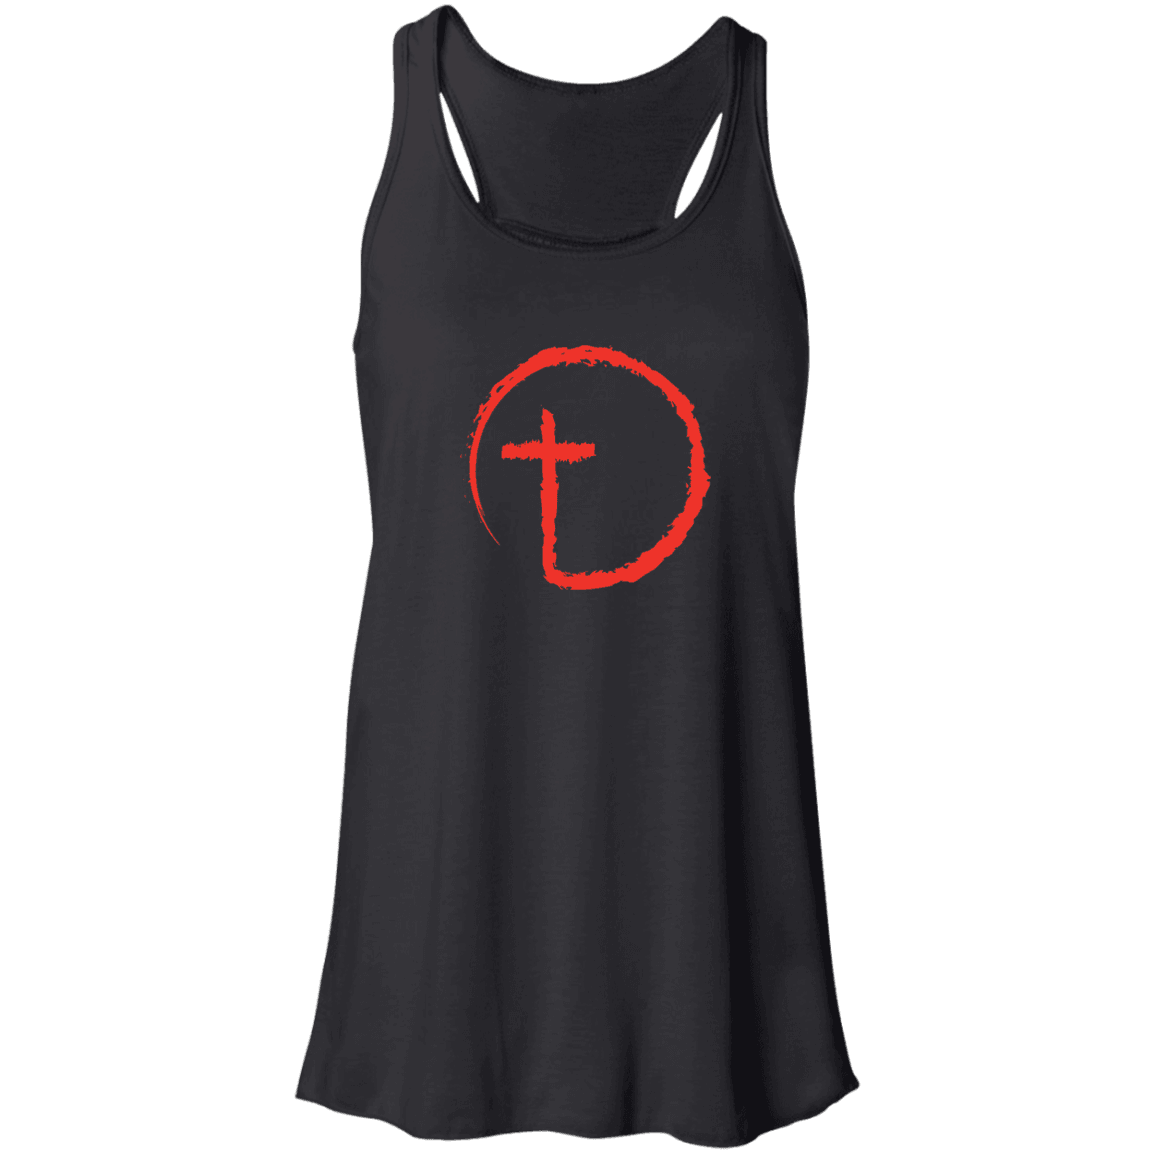 Designs by MyUtopia Shout Out:Abstract Cross Circle Ladies Flowy Racerback Tank,X-Small / Black,Tank Tops